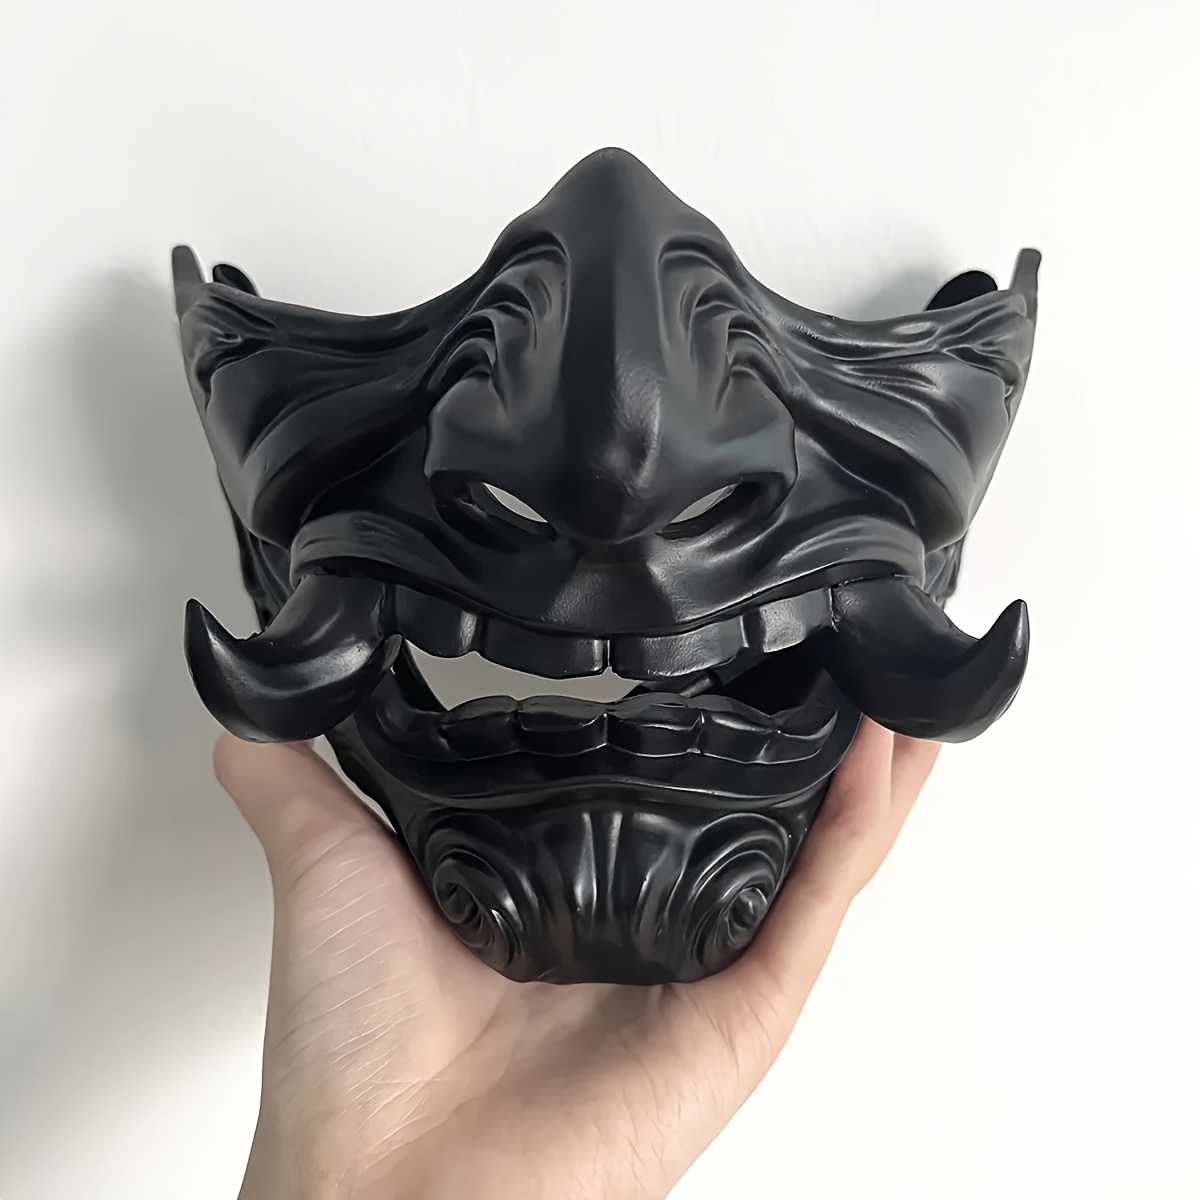 

1pc Unisex Warrior Resin Mask - Half-face, Industrial Style For Parties & Masquerade Balls